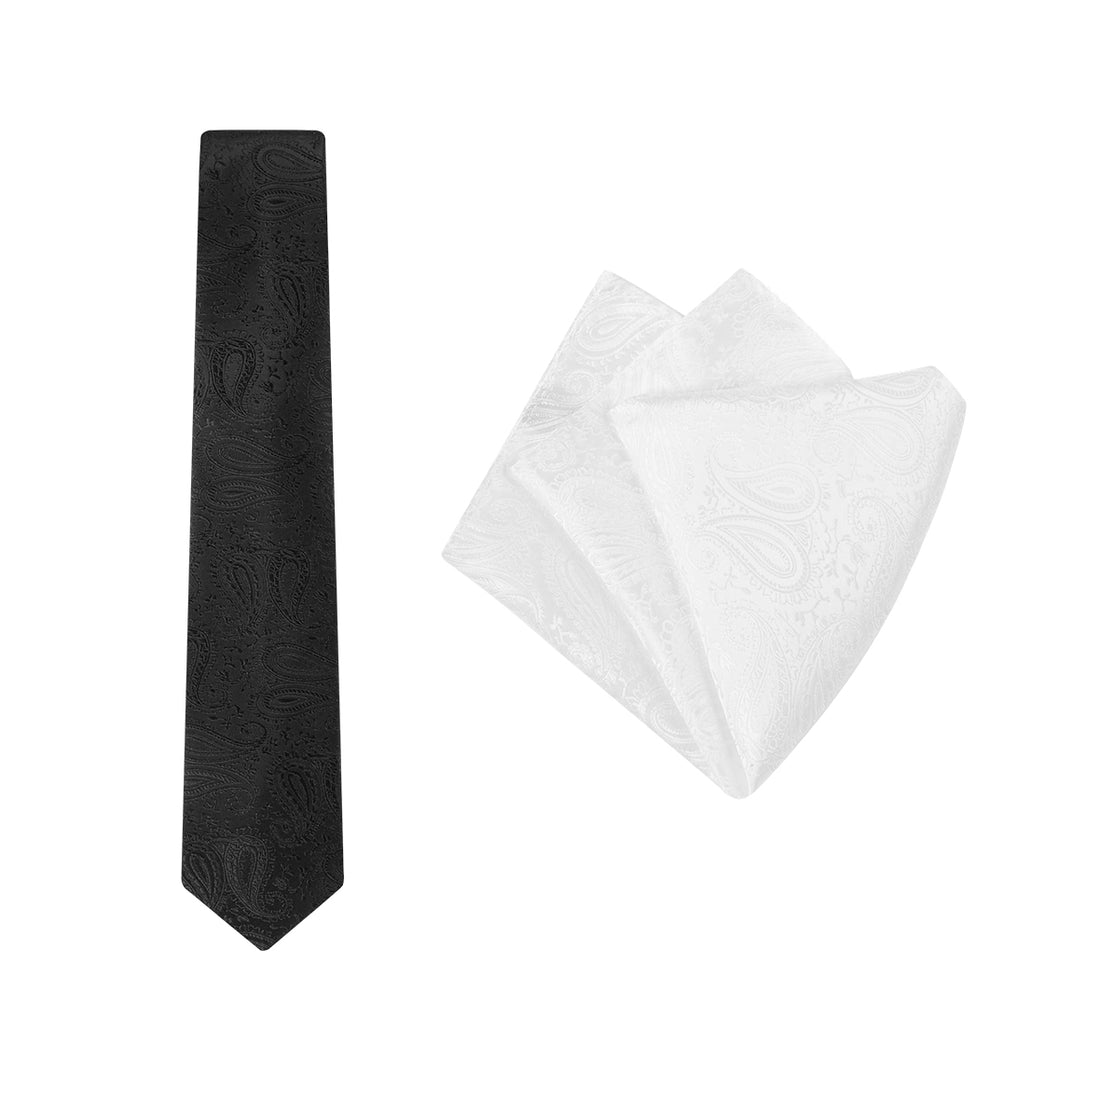 TIE + POCKET SQUARE SET. Paisley. Black/White. Supplied with a white pocket square.-Ties-PEROZ Accessories